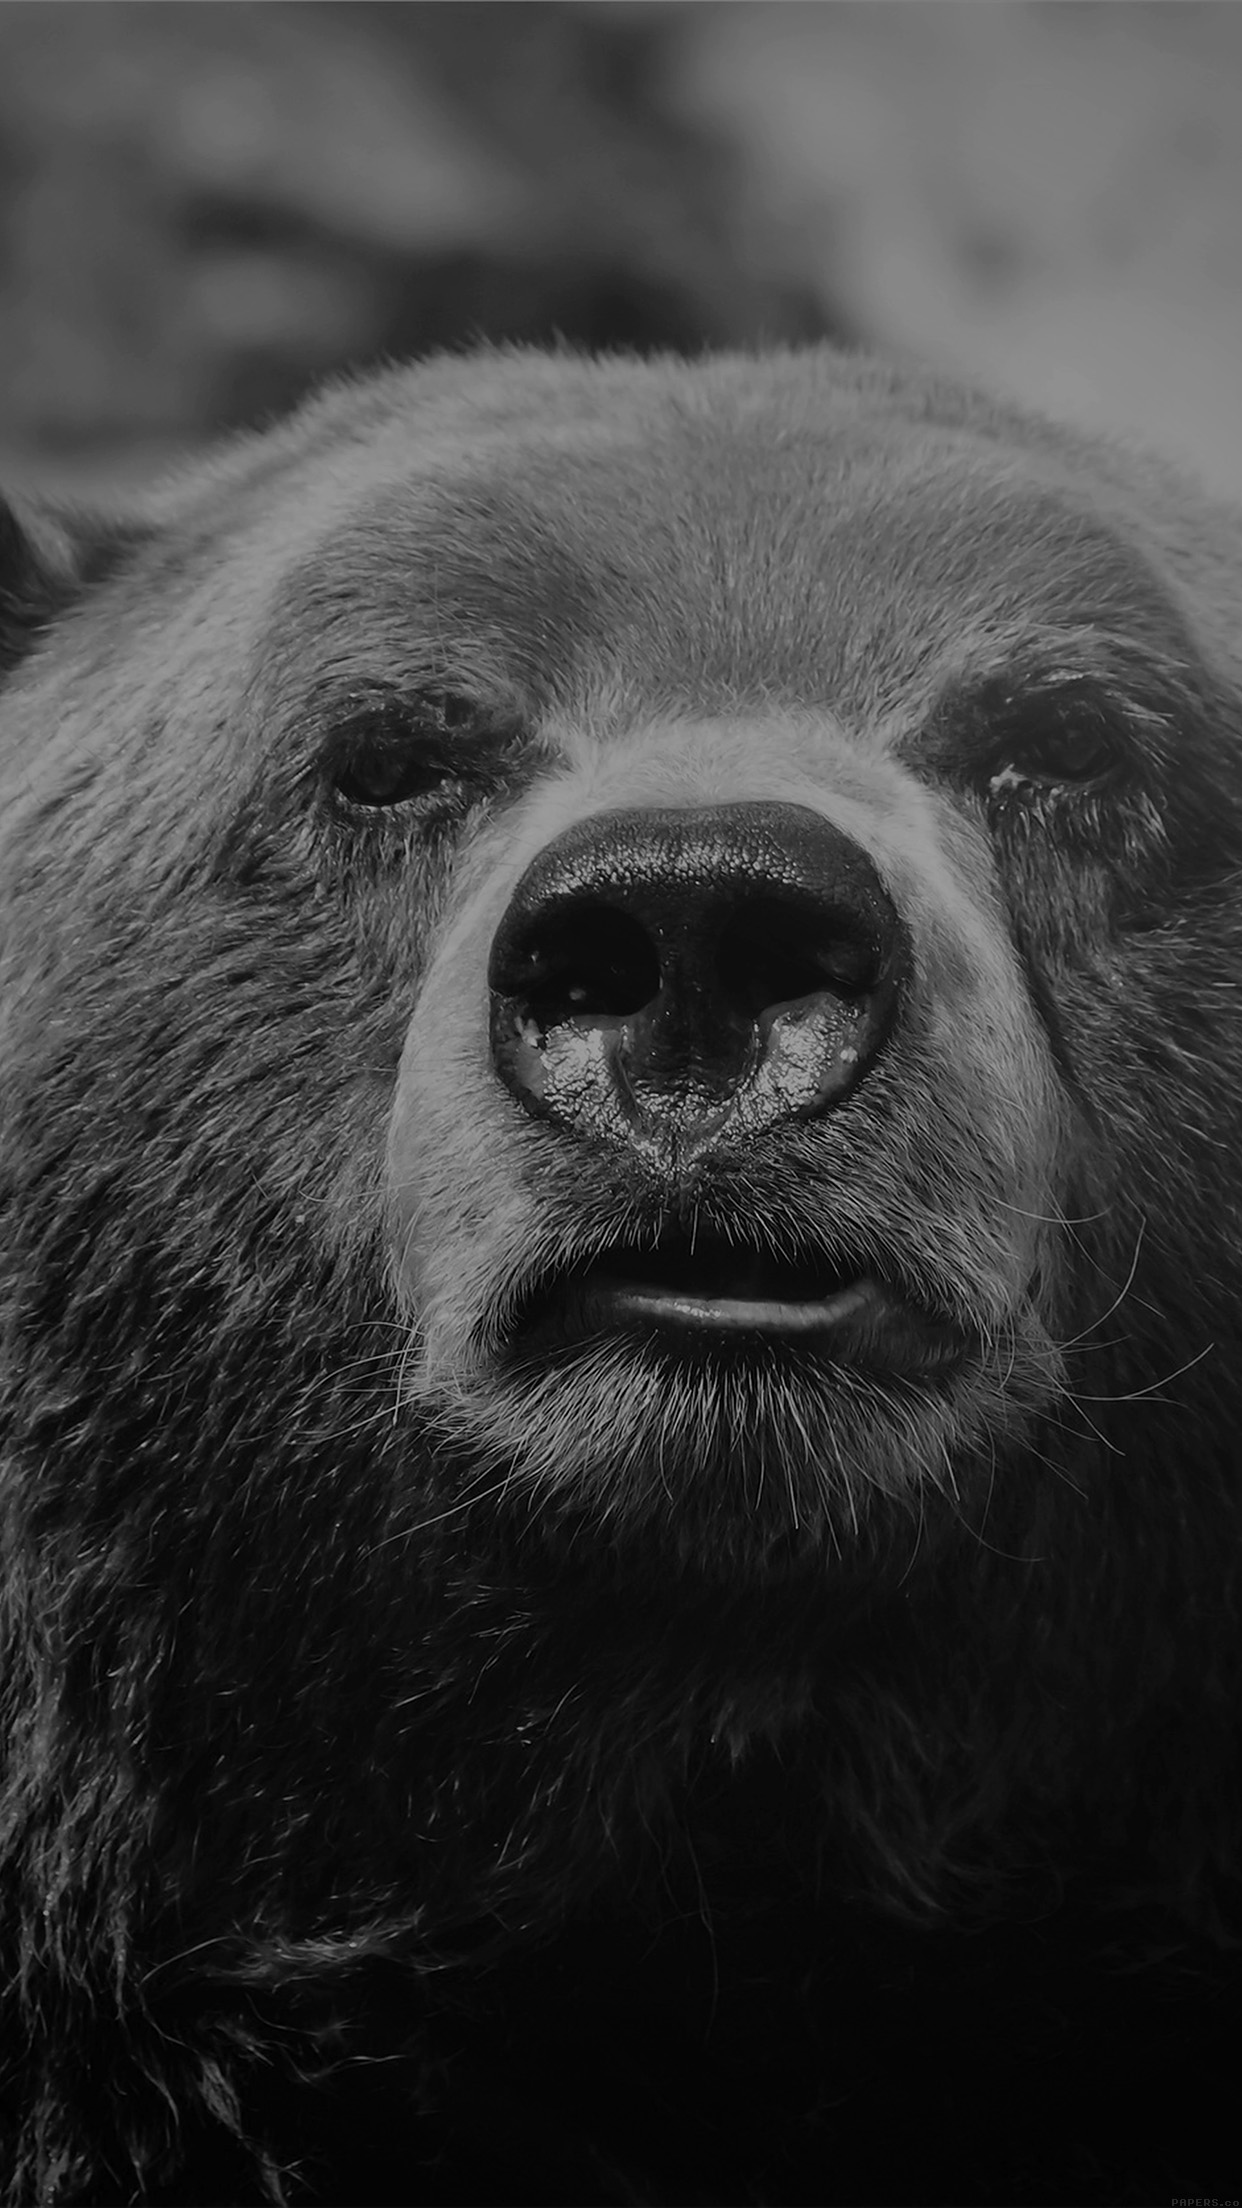 Bear Face What The Hell Nature Bw Dark Animal Android wallpaper